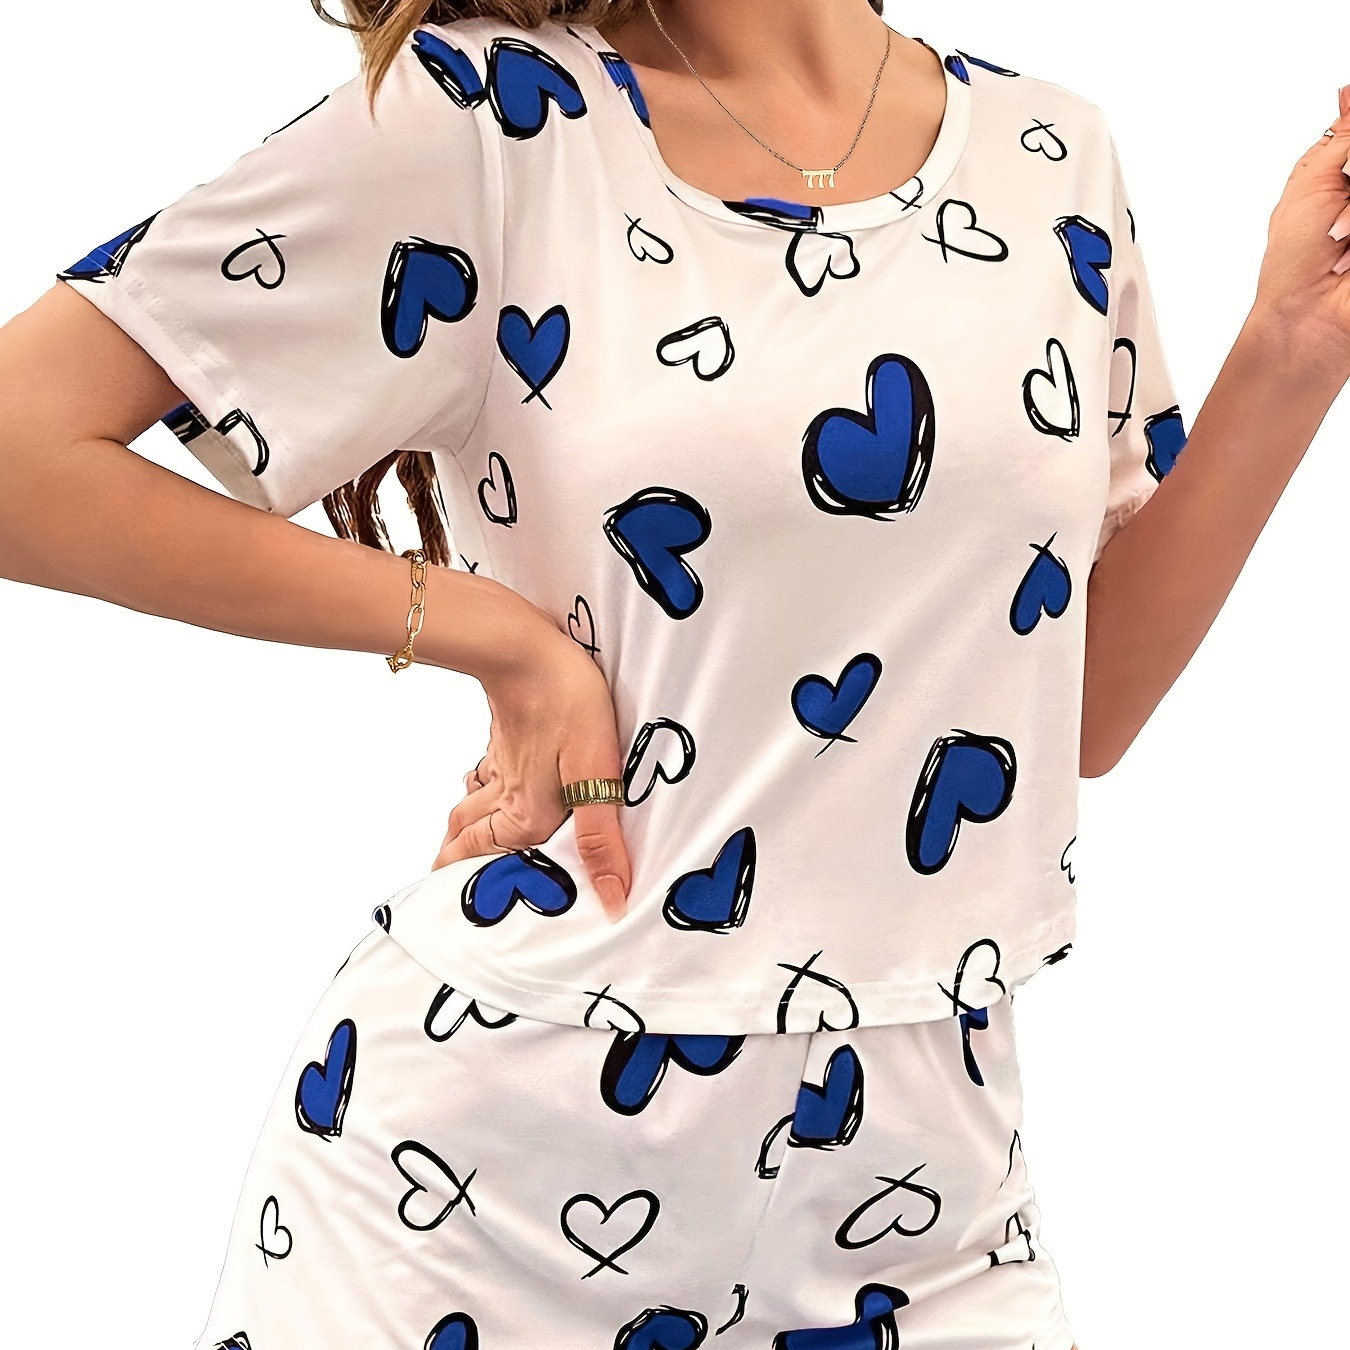 

Women's Heart Print Casual Pajama Set, Short Sleeve Round Neck Top & Shorts, Comfortable Relaxed Fit